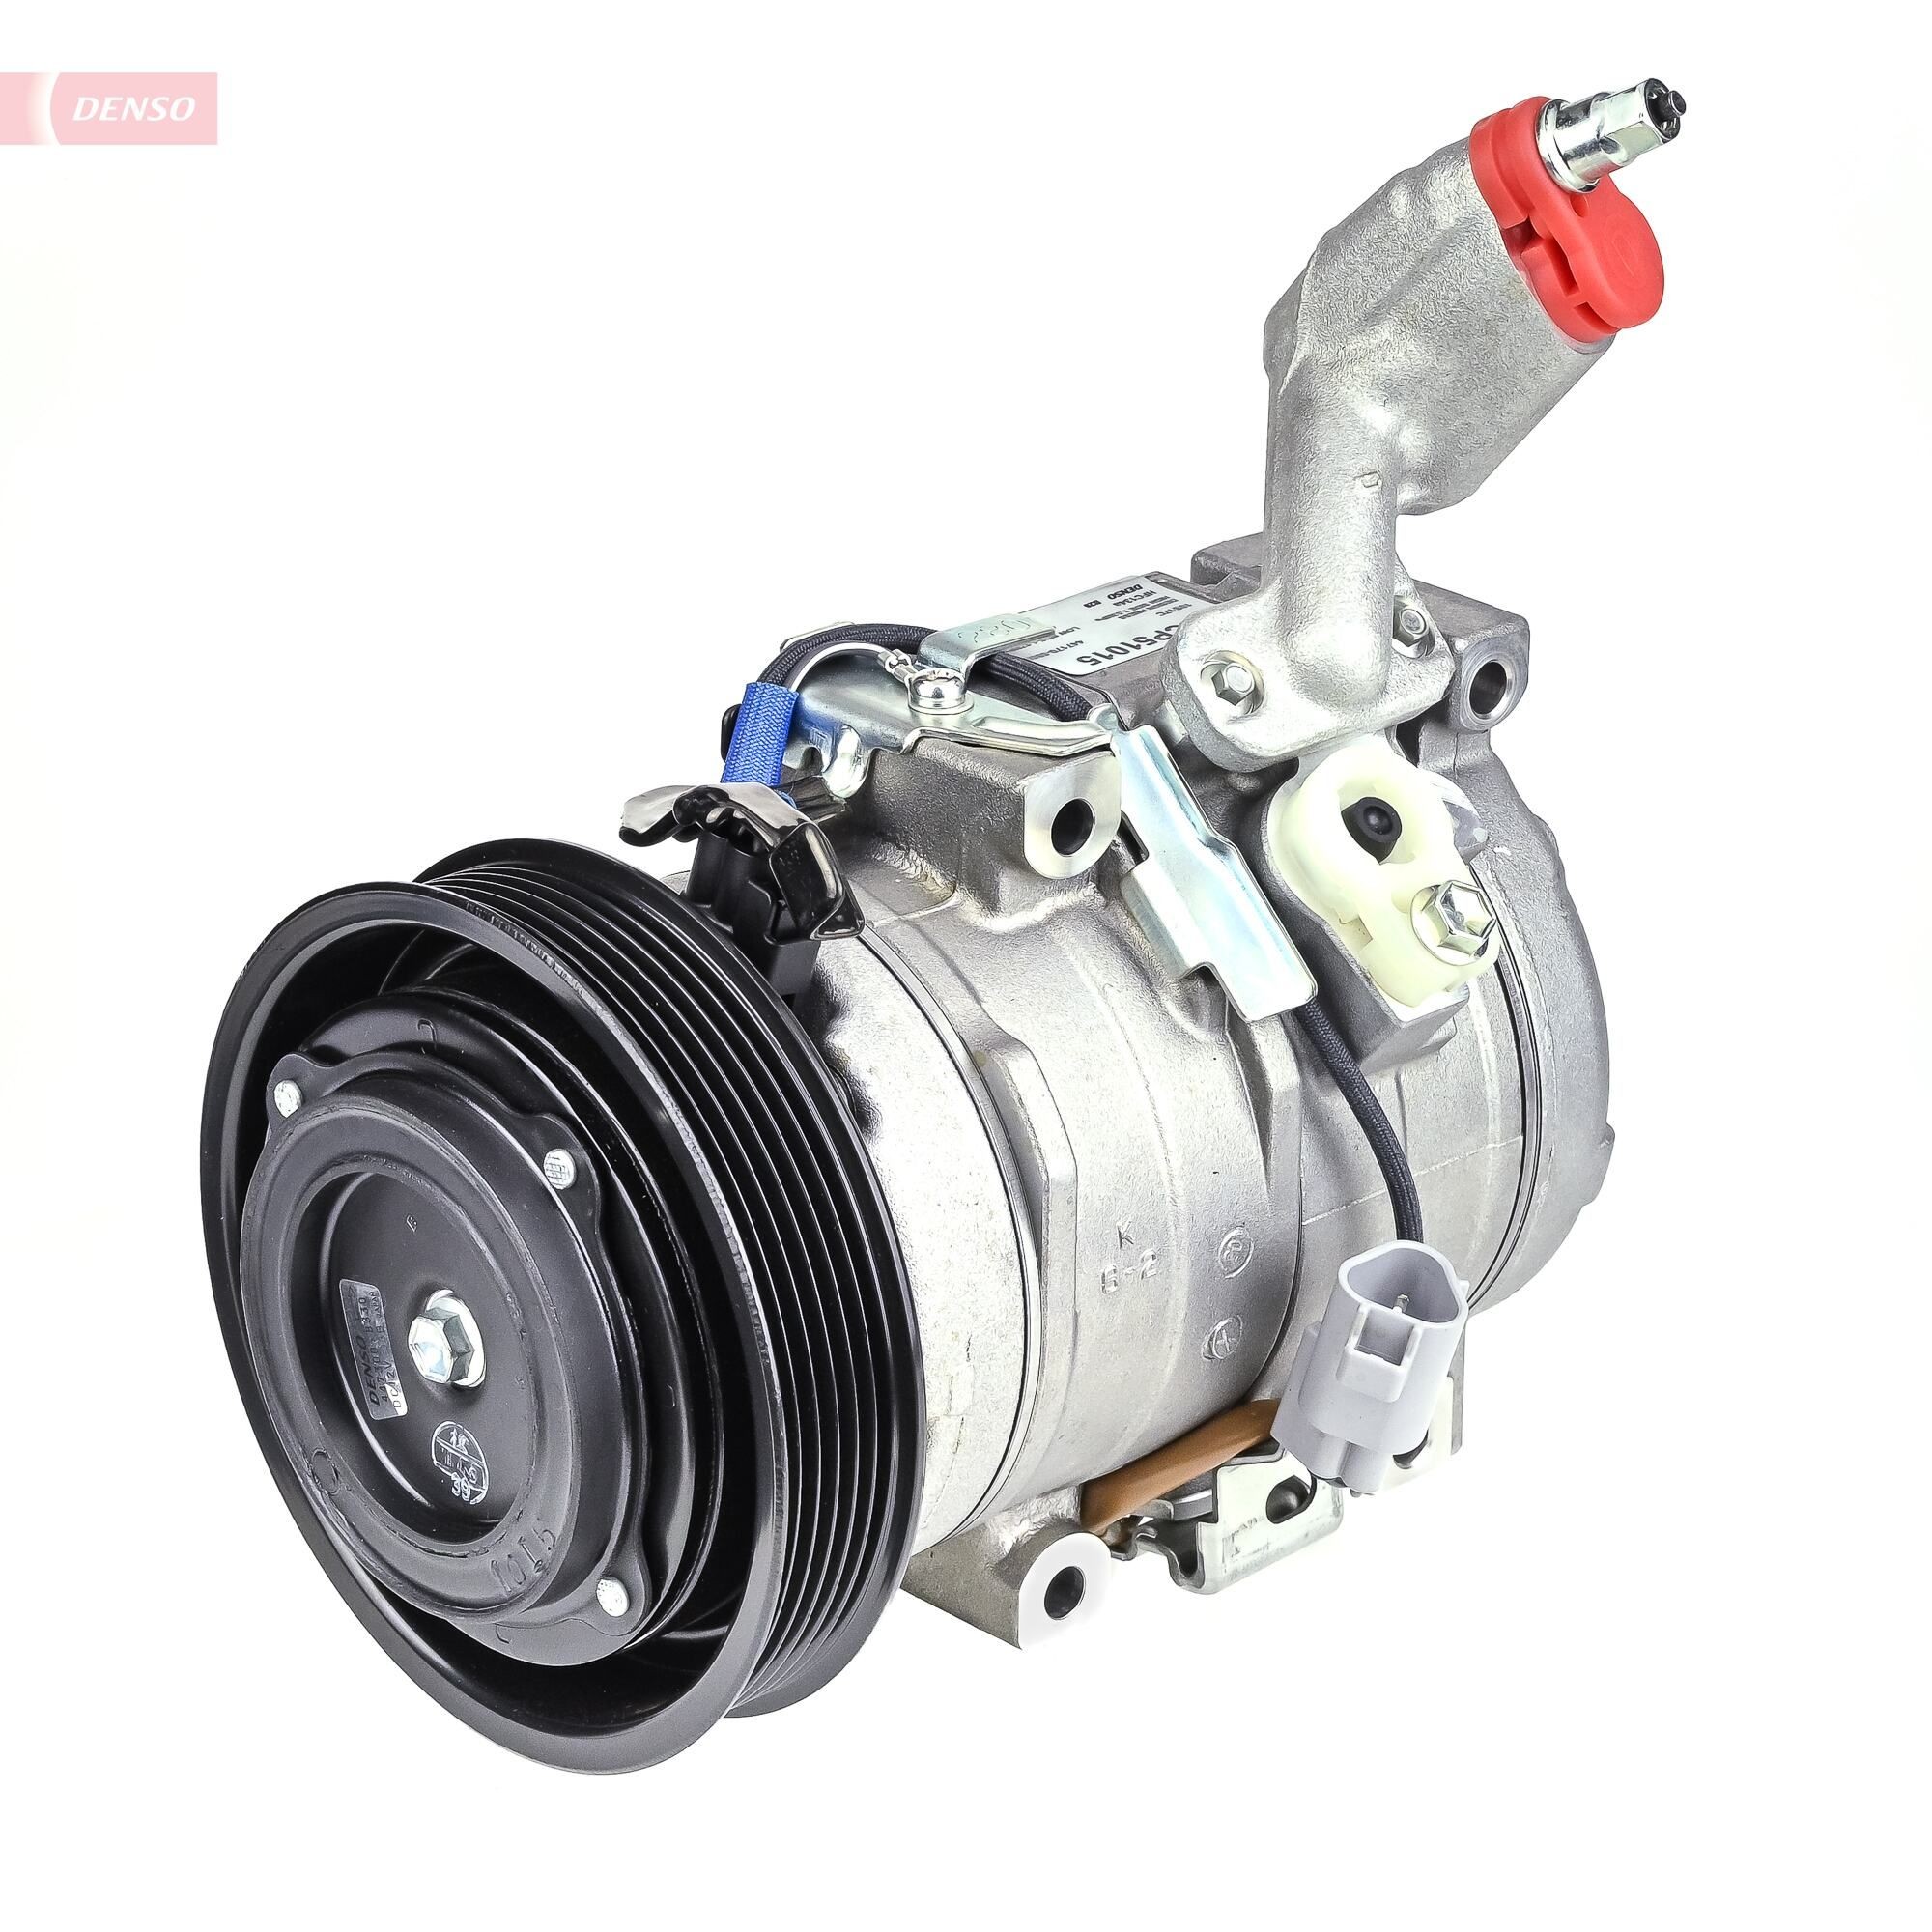 DENSO DCP51015 Air conditioning compressor 10S17C, 12V, PAG 46, R 134a, with magnetic clutch